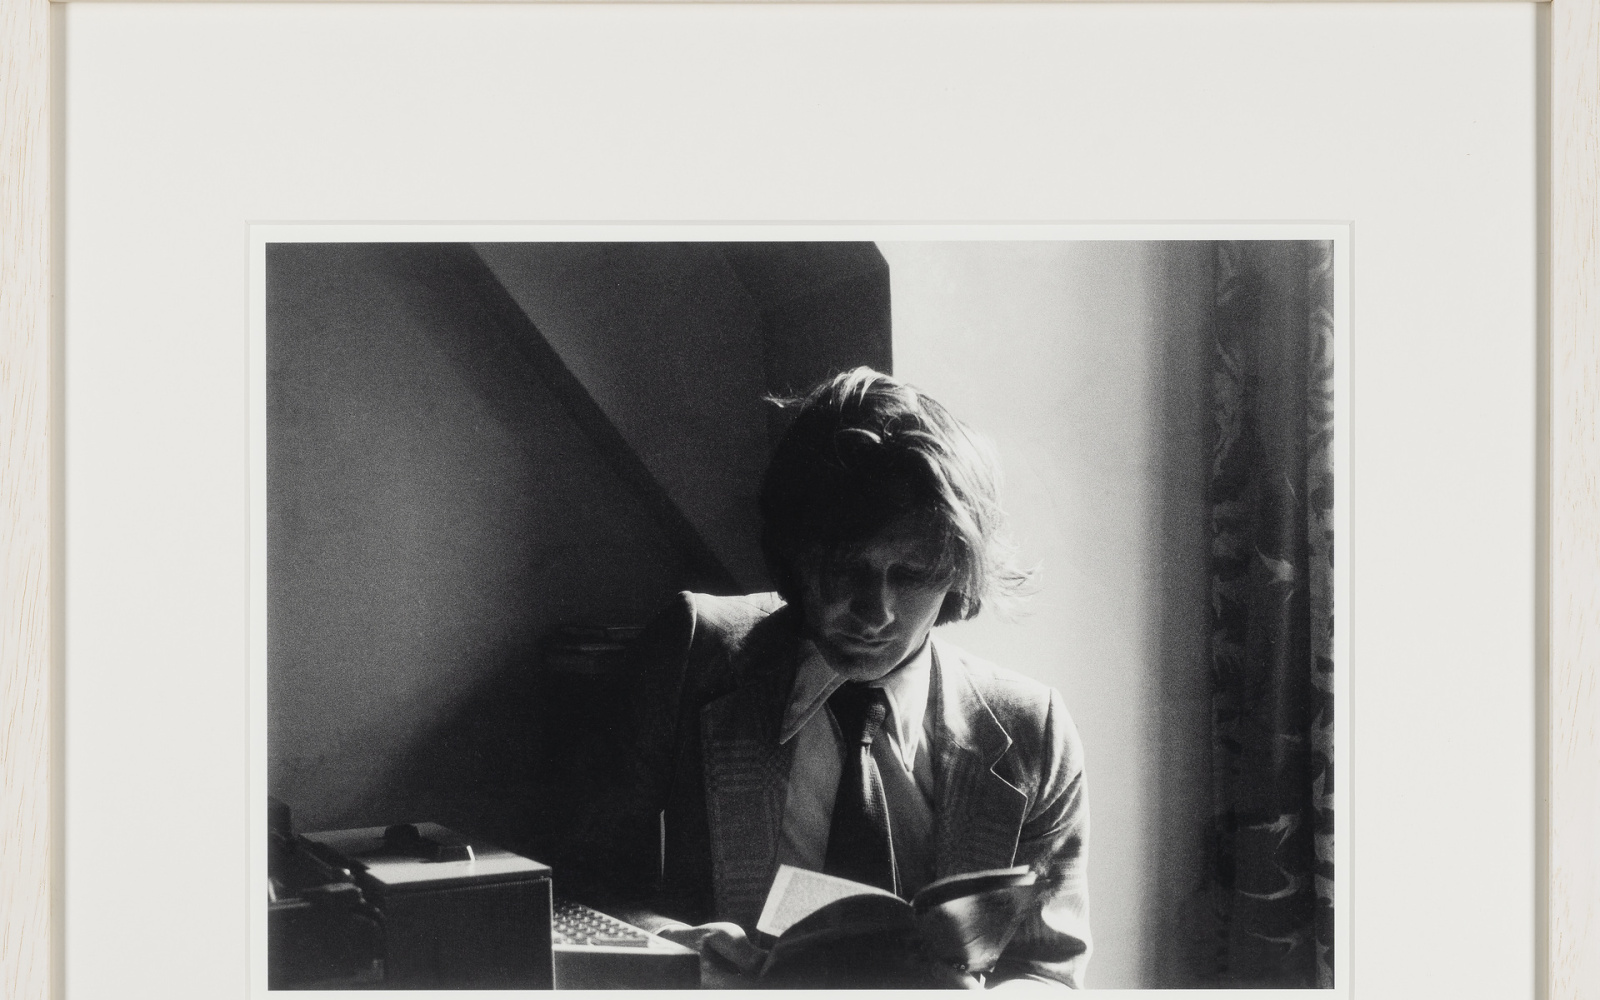 Ian Sommerville, mathematician, close friend, and collaborator of Burroughs and Gysin during their 1960s’ Paris, Tanger and London activities, sitting at WSB’s writing desk in apartment #18 at Dalmeney Court, in March 1973